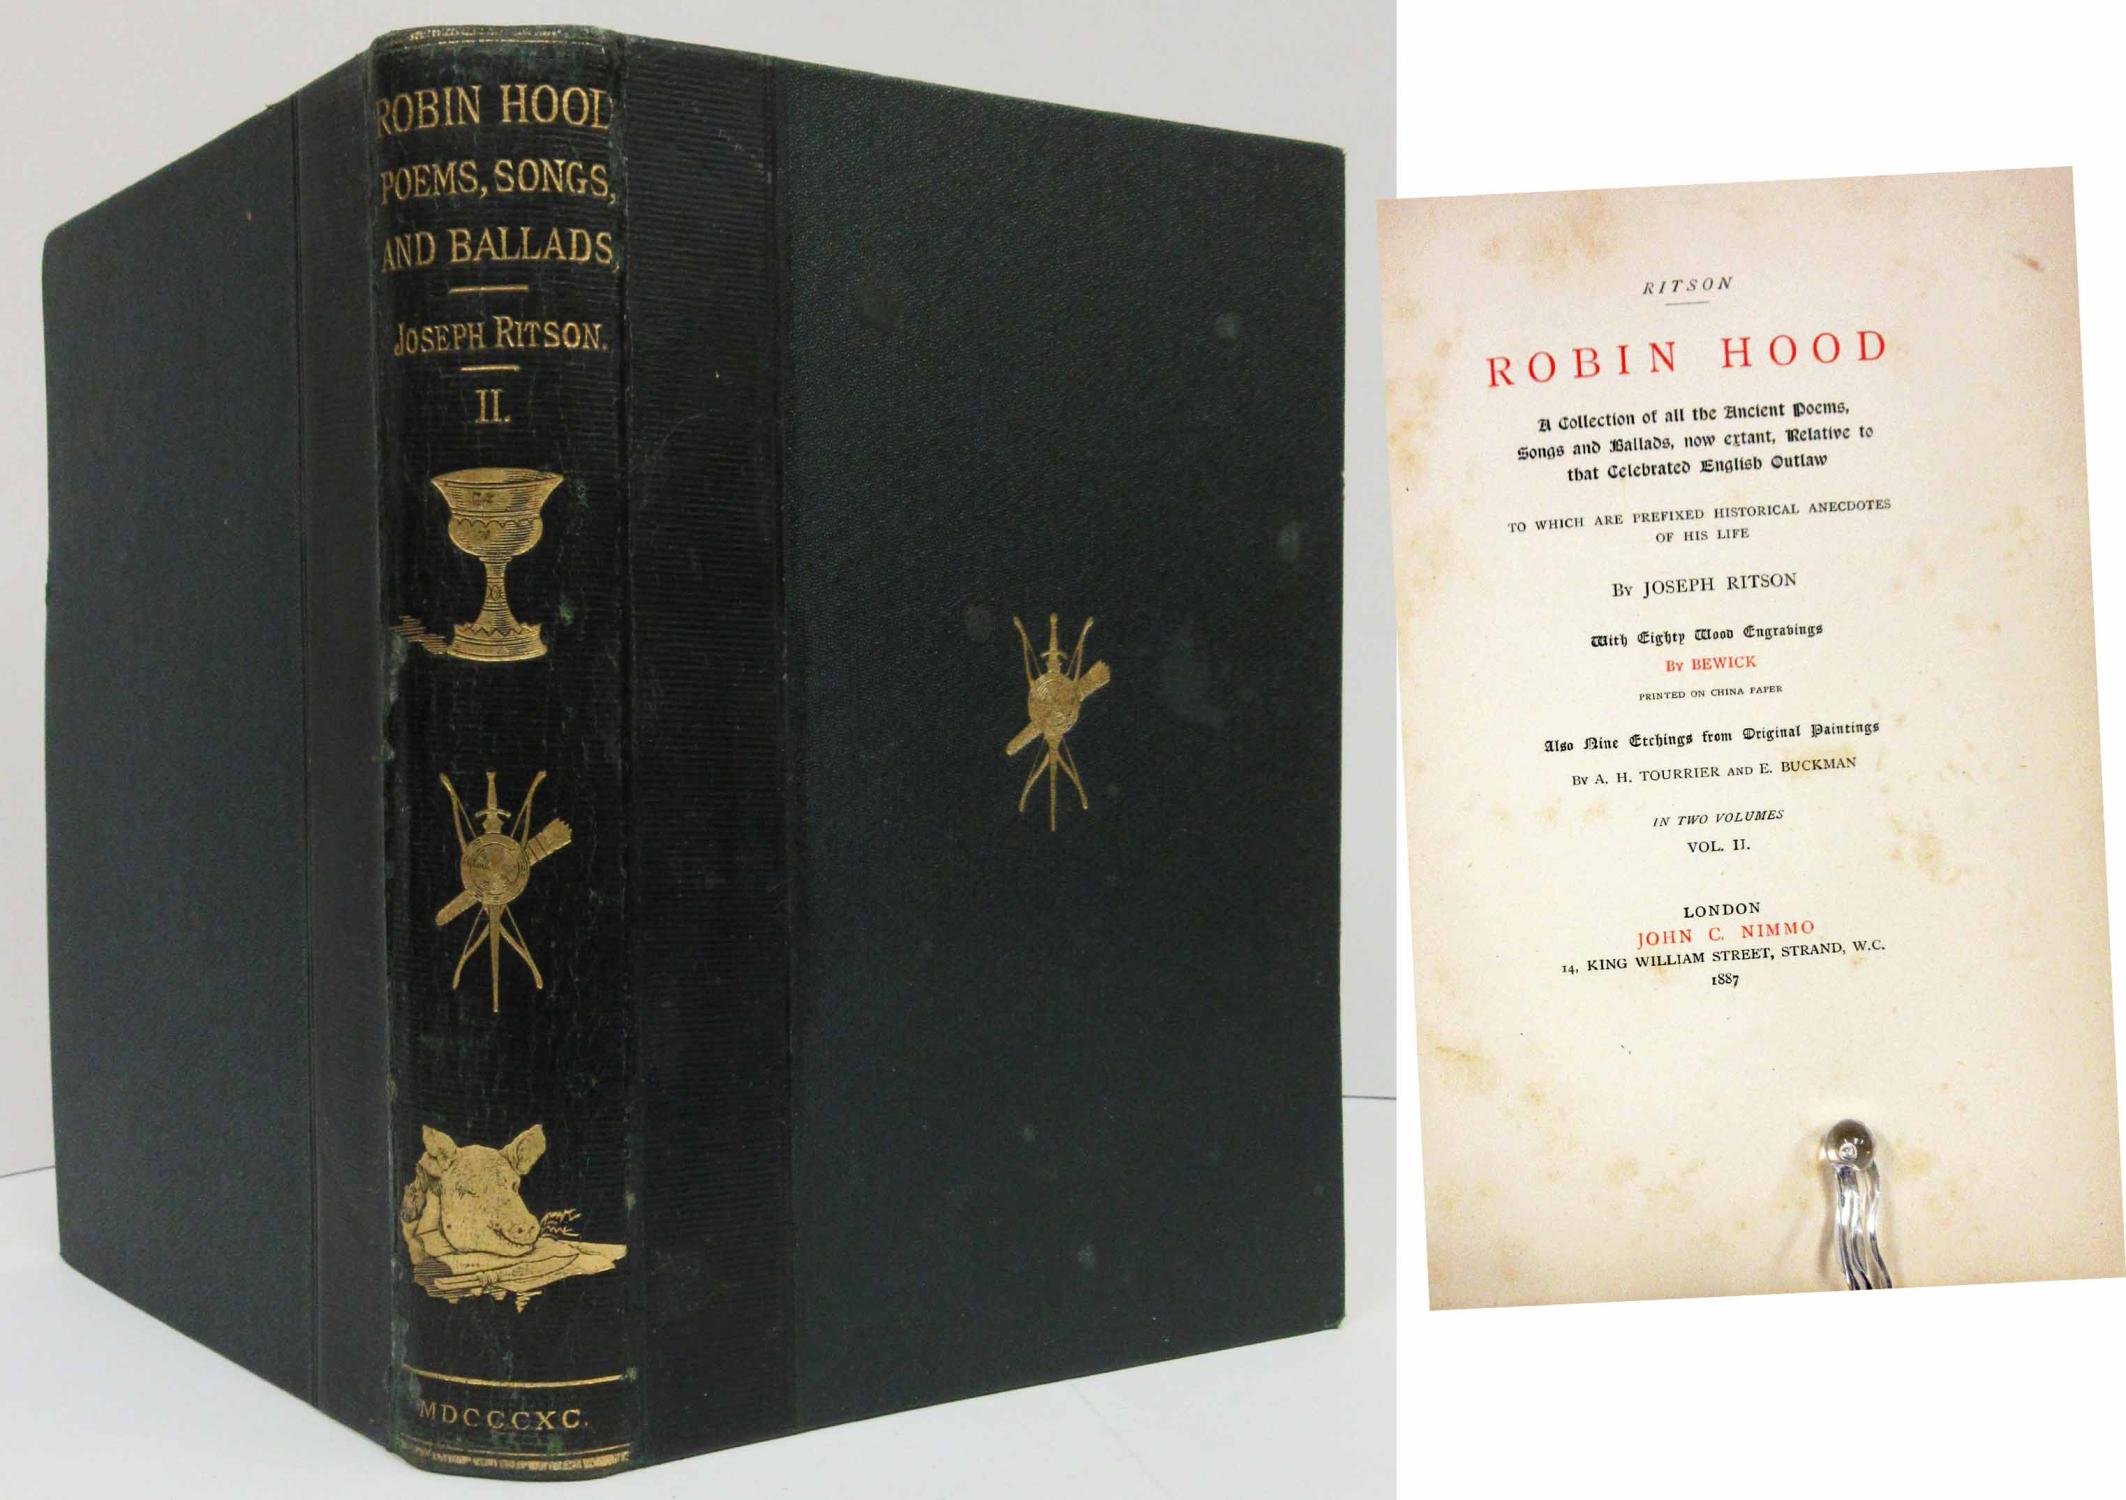 ROBIN HOOD (VOLUME 2 ONLY) Collection of all the Ancient Poems, Songs and Ballads Relative to That Celebrated English Outlaw - Ritson, Joseph